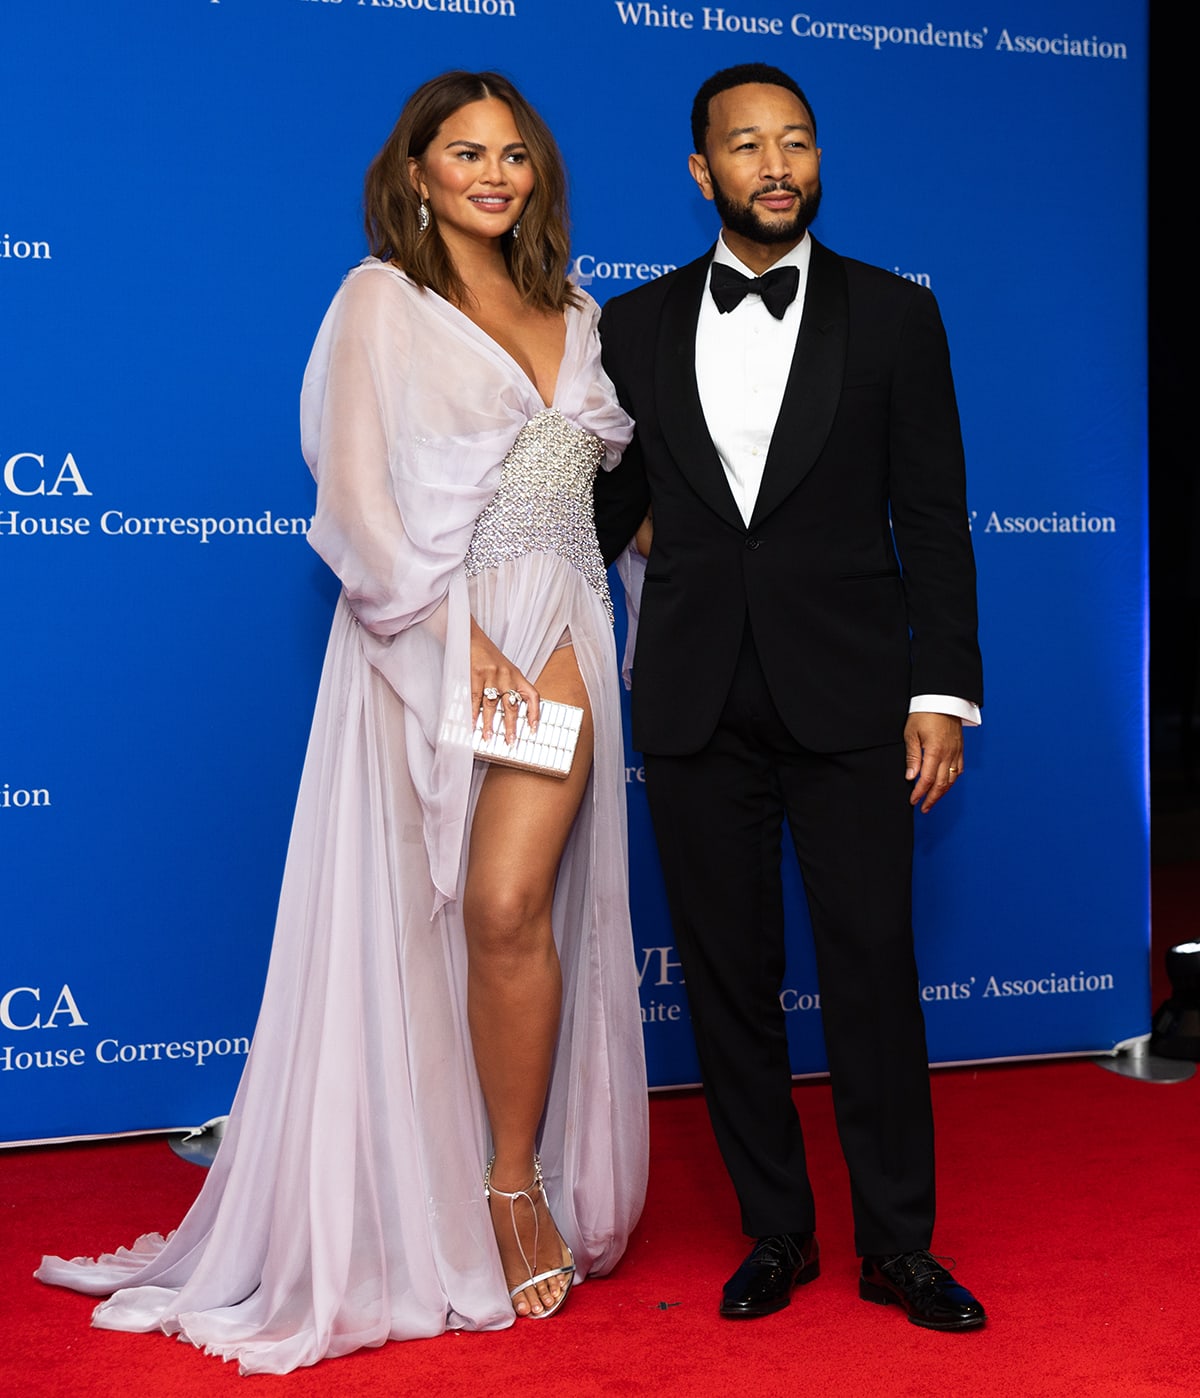 Chrissy Teigen showcases her legs in a Georges Hobeika sheer ruffled gown and Aquazzura heels as she poses alongside her husband John Legend at the White House Correspondents' Dinner at the Washington Hilton Hotel on April 29, 2023